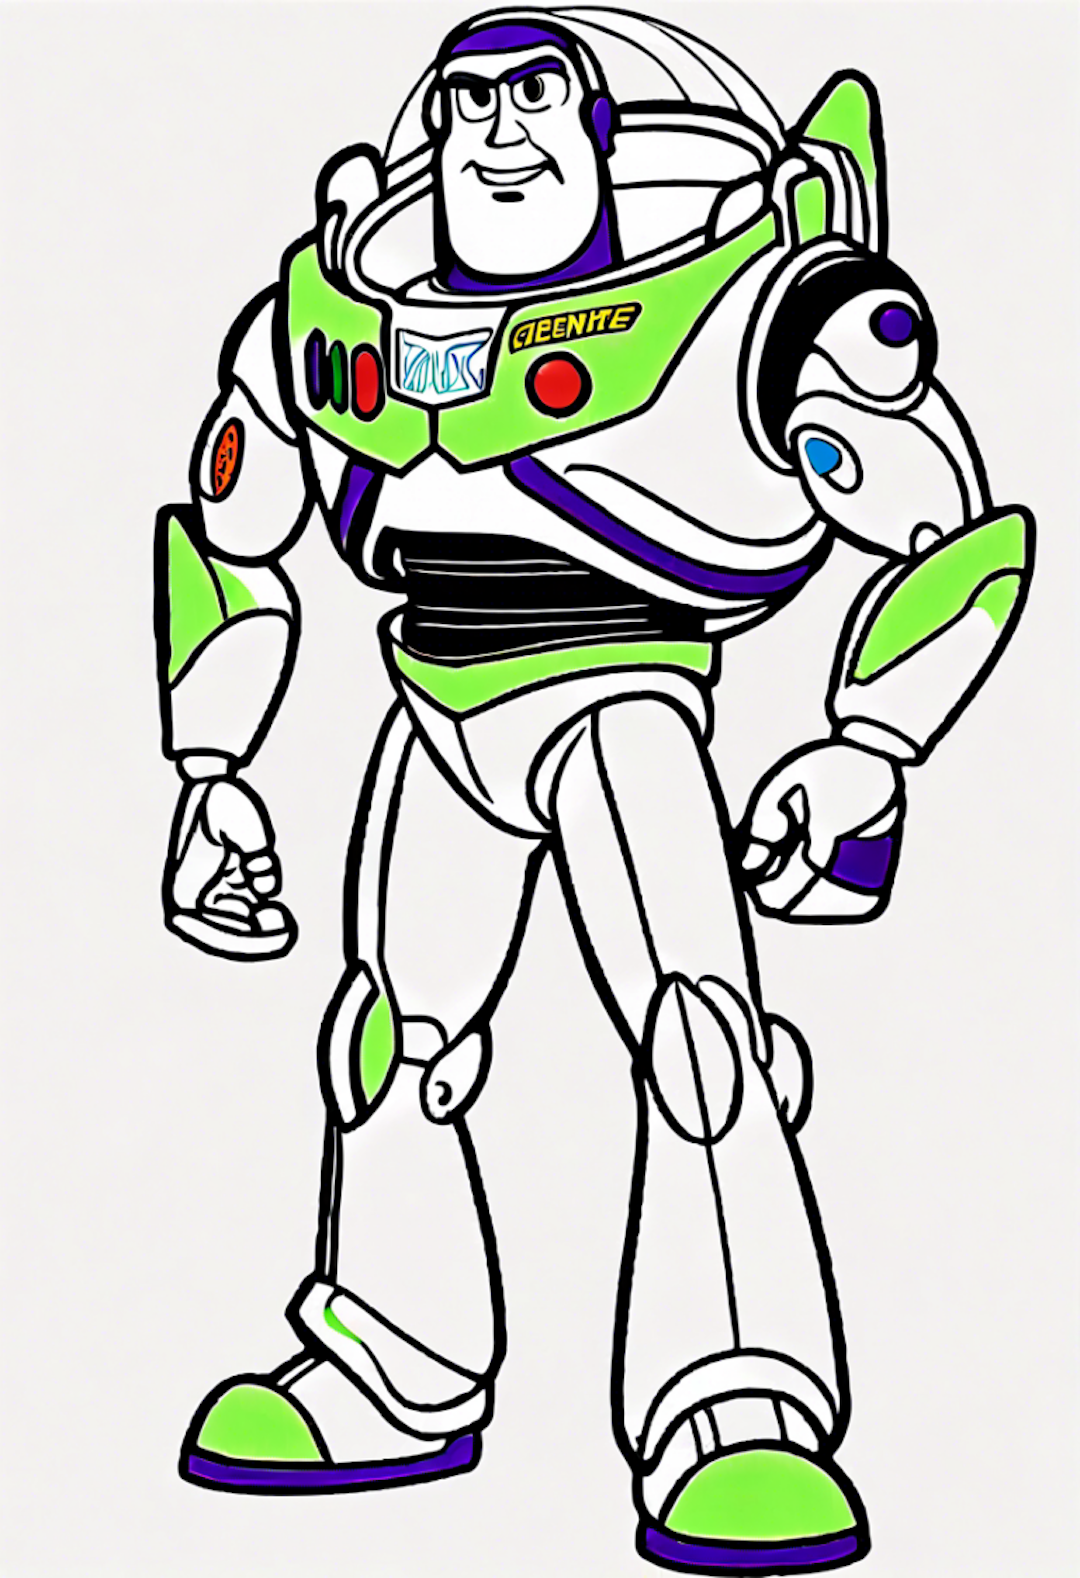 Buzz Lightyear Adventure Coloring Page coloring pages